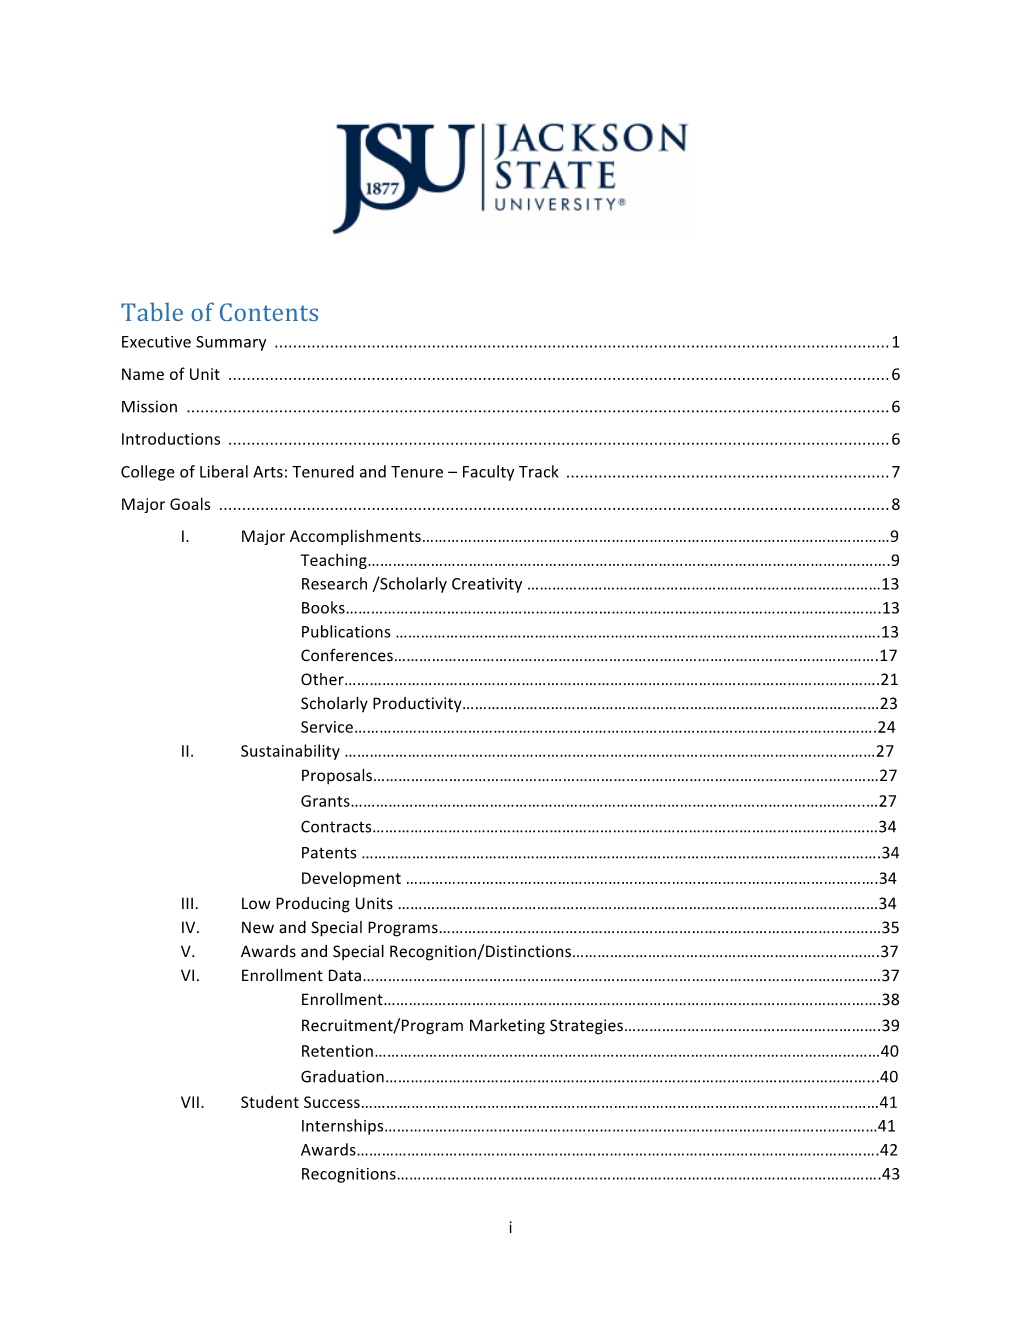 Table of Contents Executive Summary